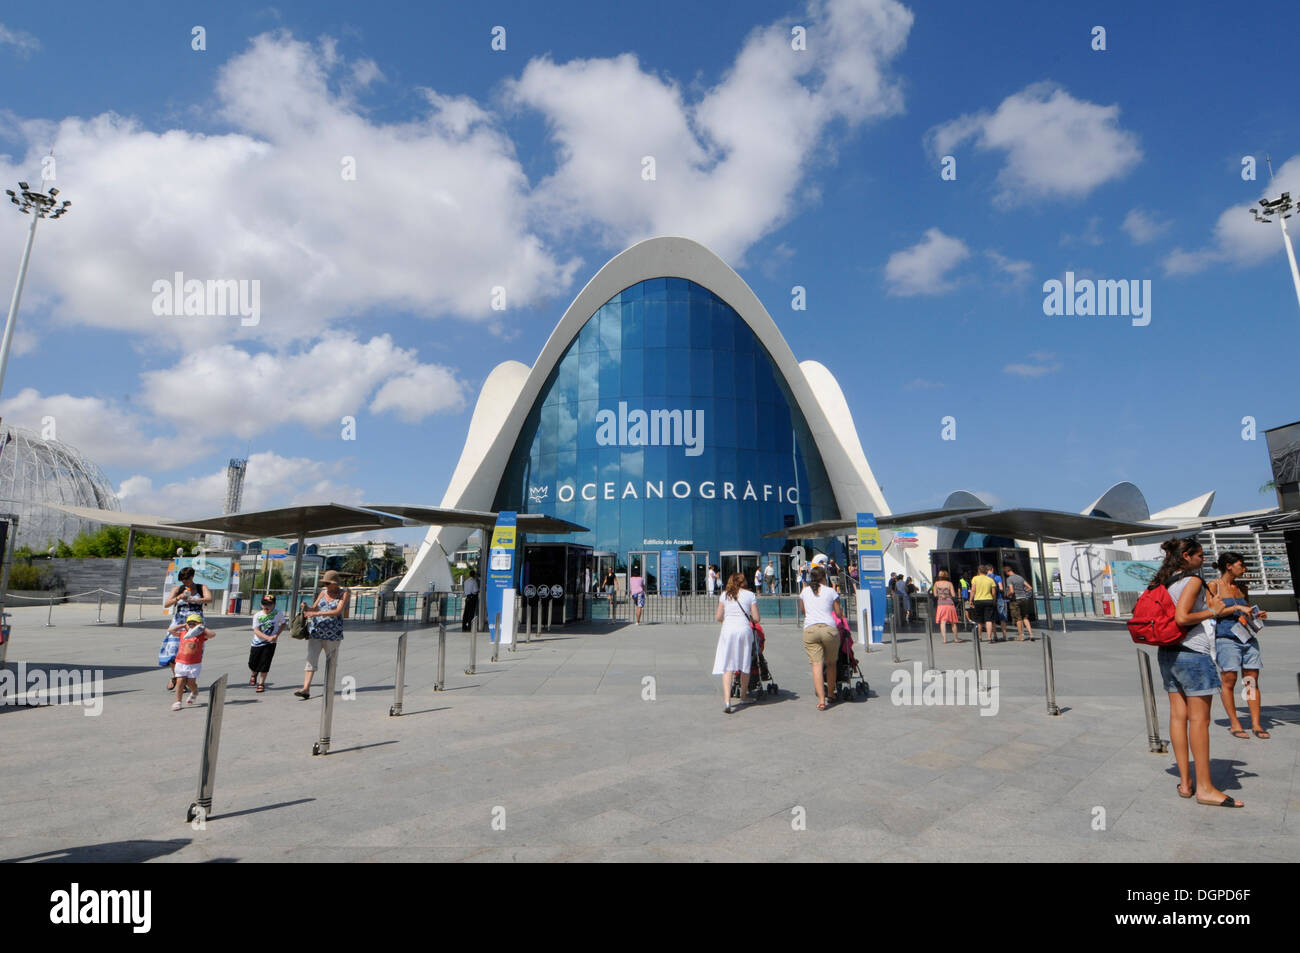 L'Oceanogràfic, a Marine Park located in the City of Arts and Sciences of Valencia, Spain. Stock Photo